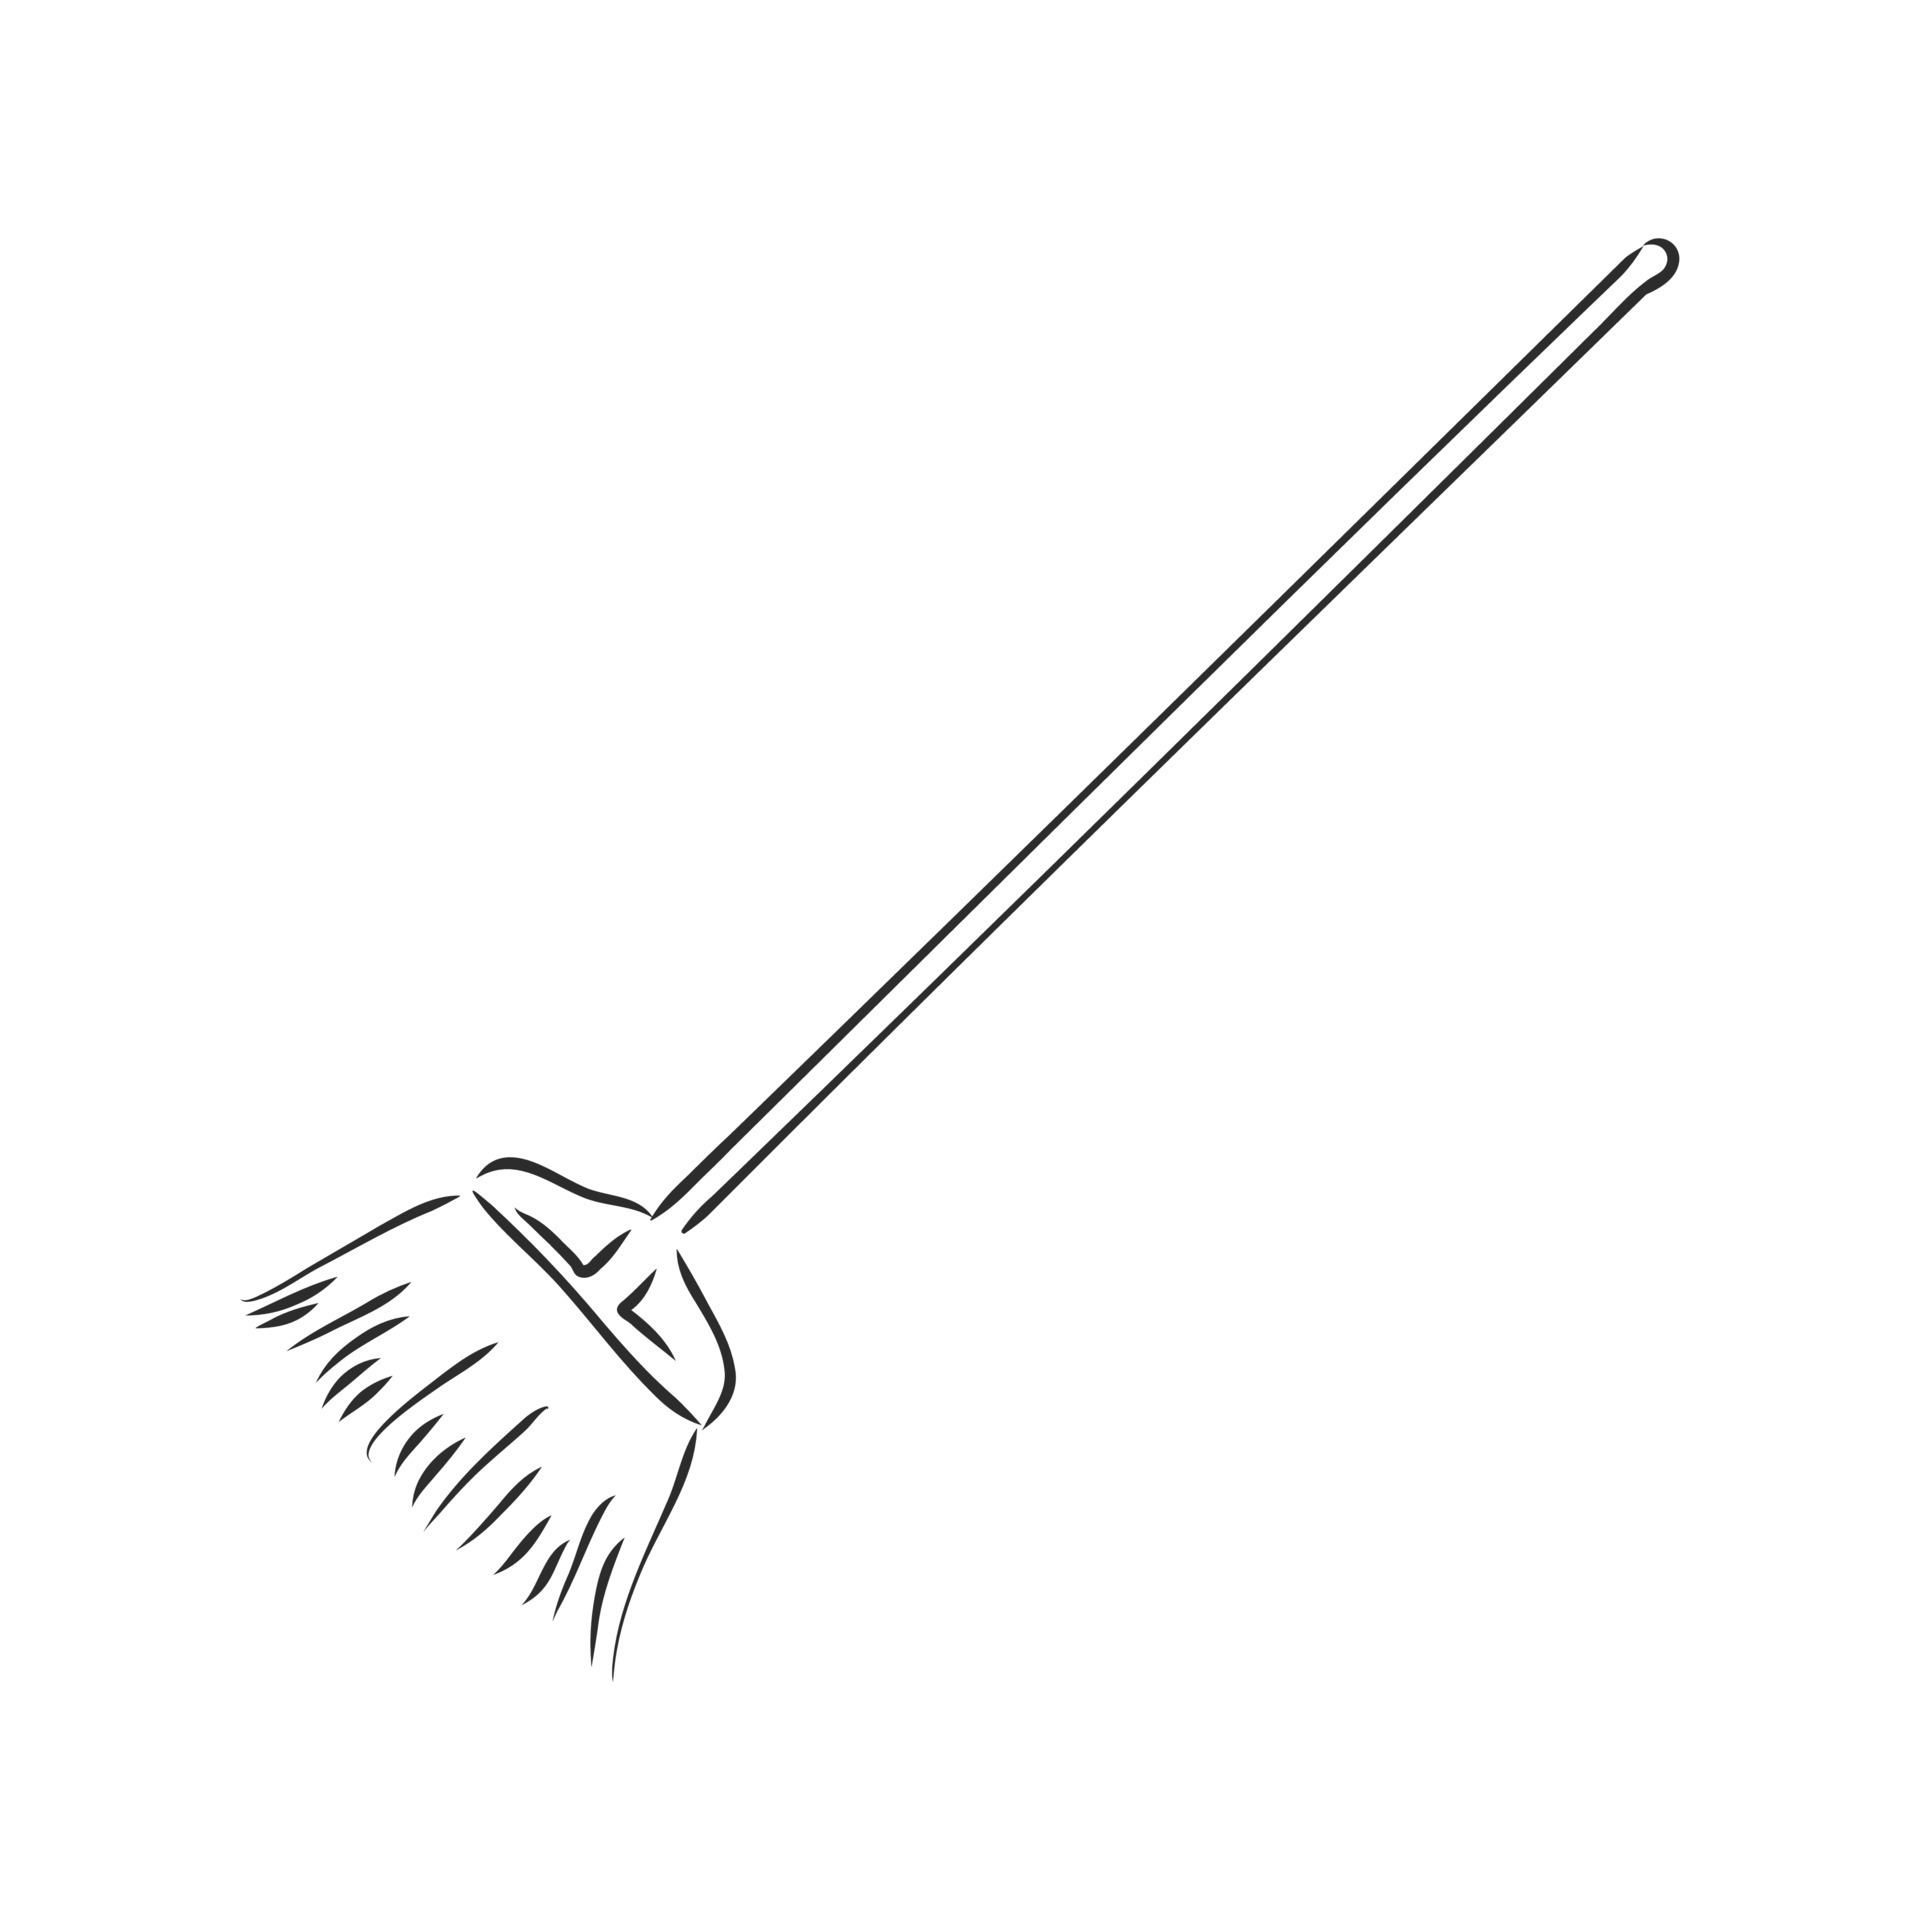 Hand Draw Sketch Of Broom And Trash Bin Stock Photo, Picture And Royalty  Free Image. Image 85762888.